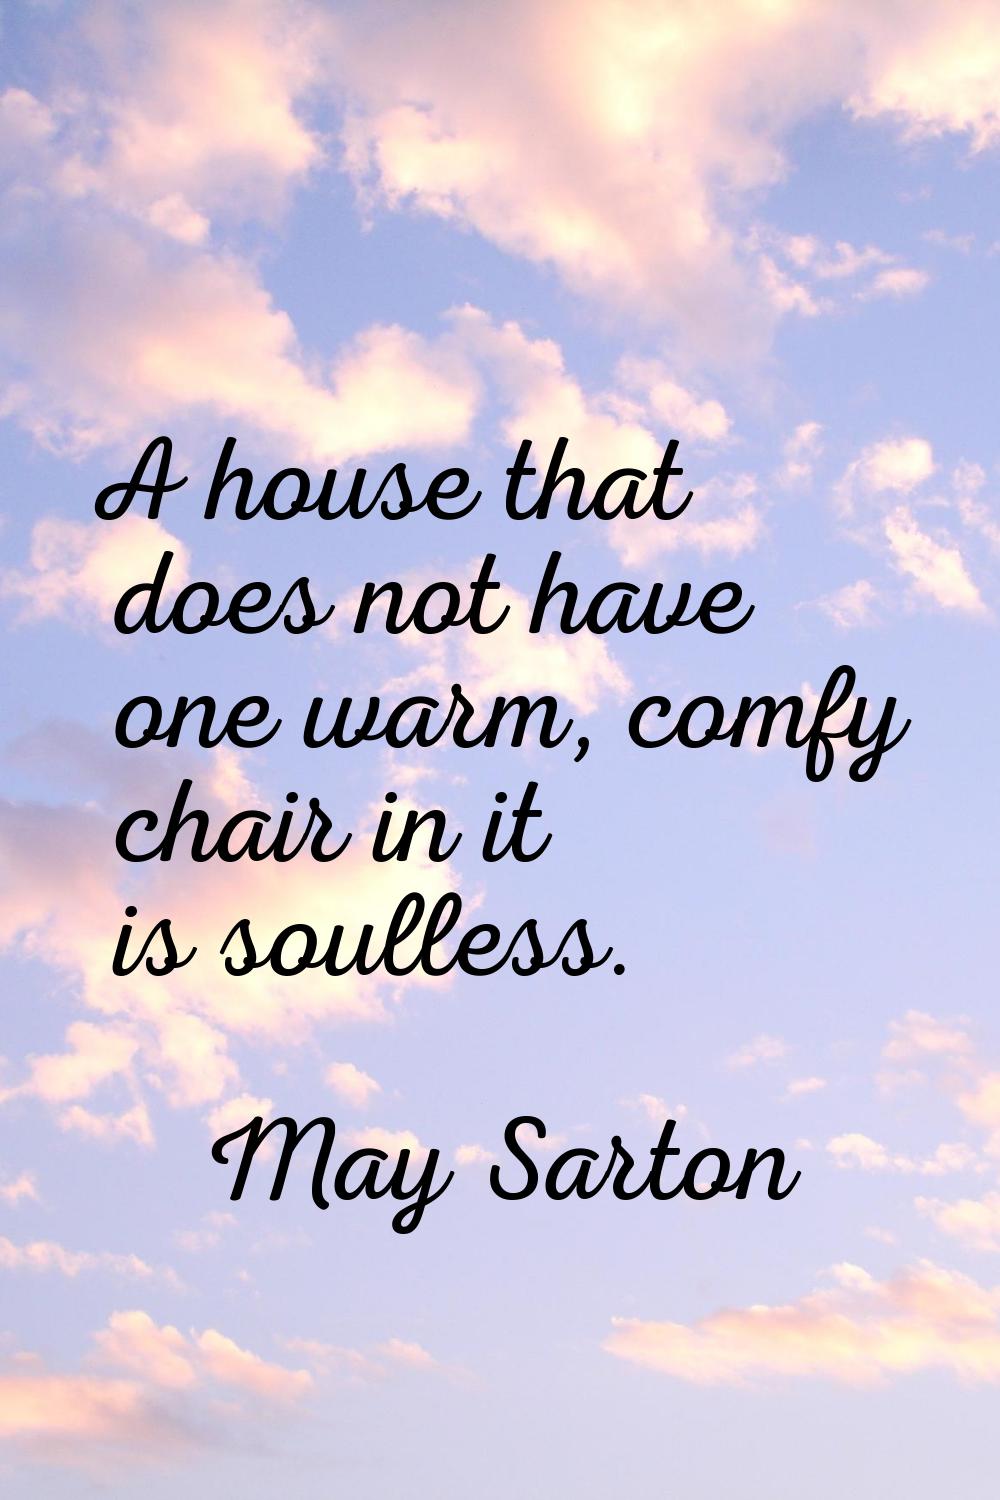 A house that does not have one warm, comfy chair in it is soulless.